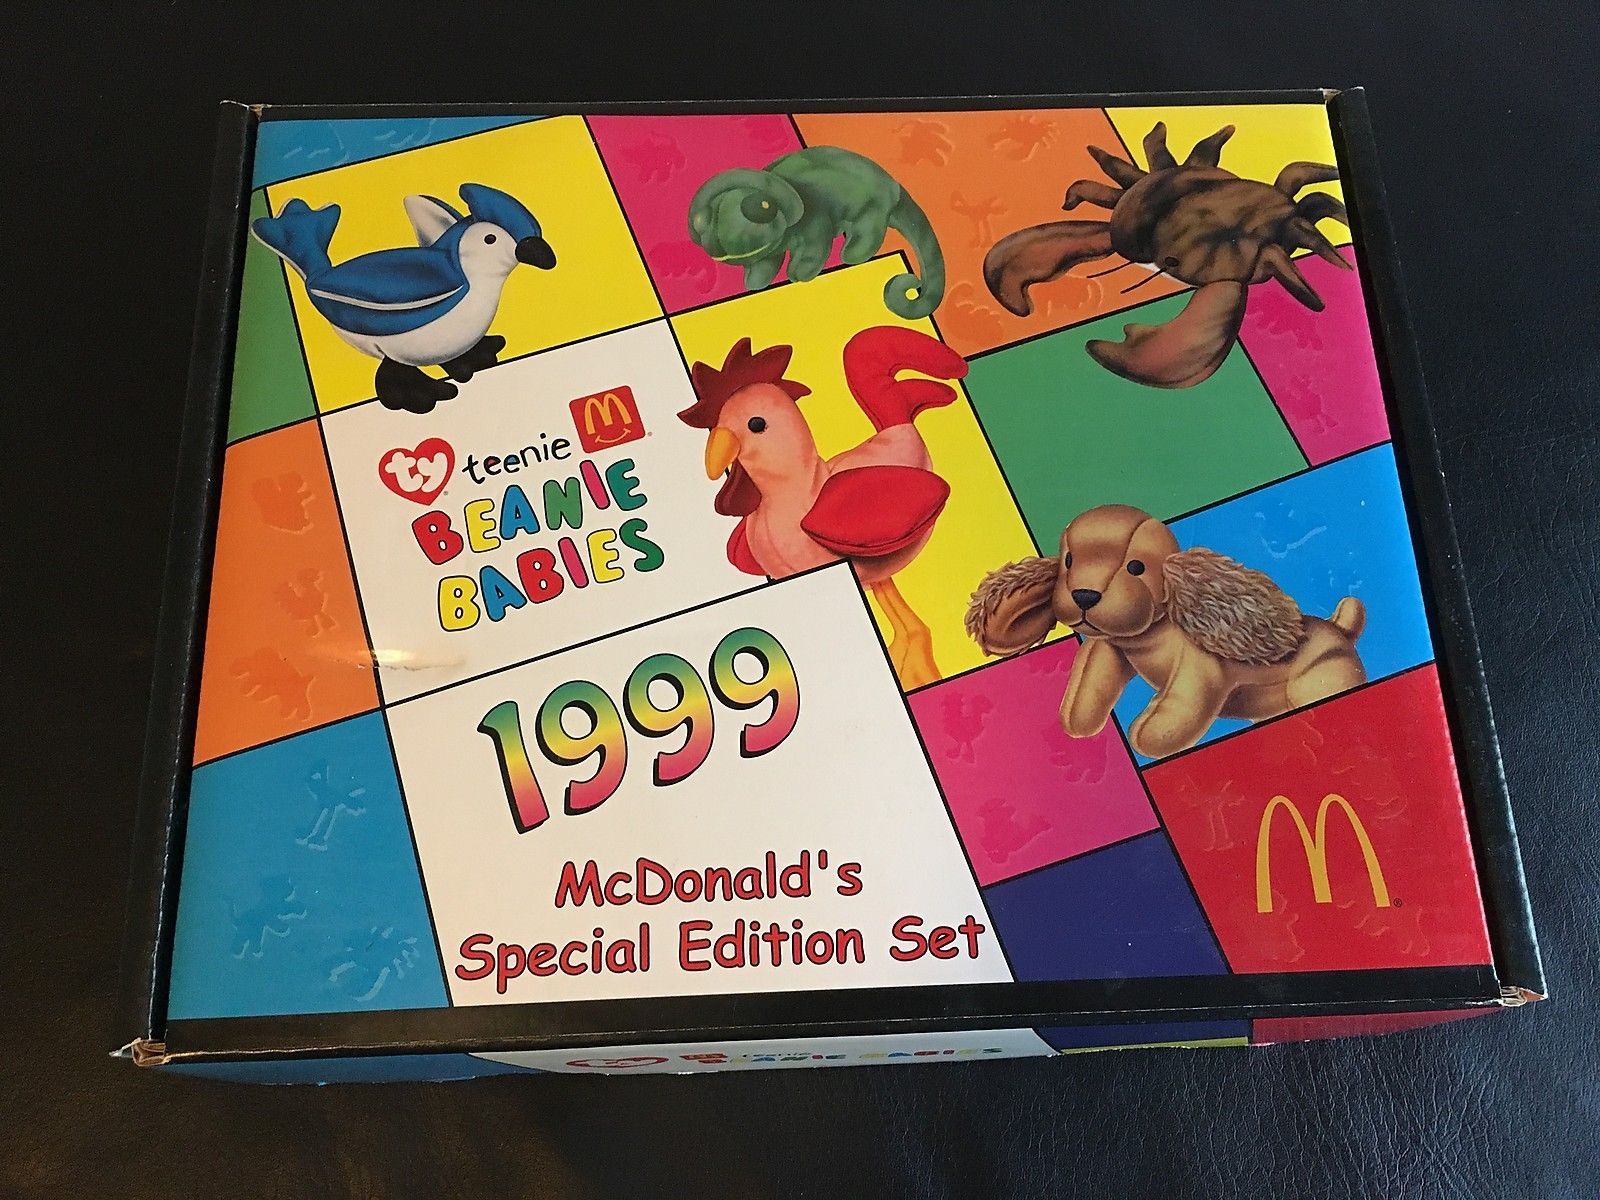 TY TEENIE BEANIE BABIES 1999 MCDONALD'S SPECIAL EDITION BOXED SET - $19.95